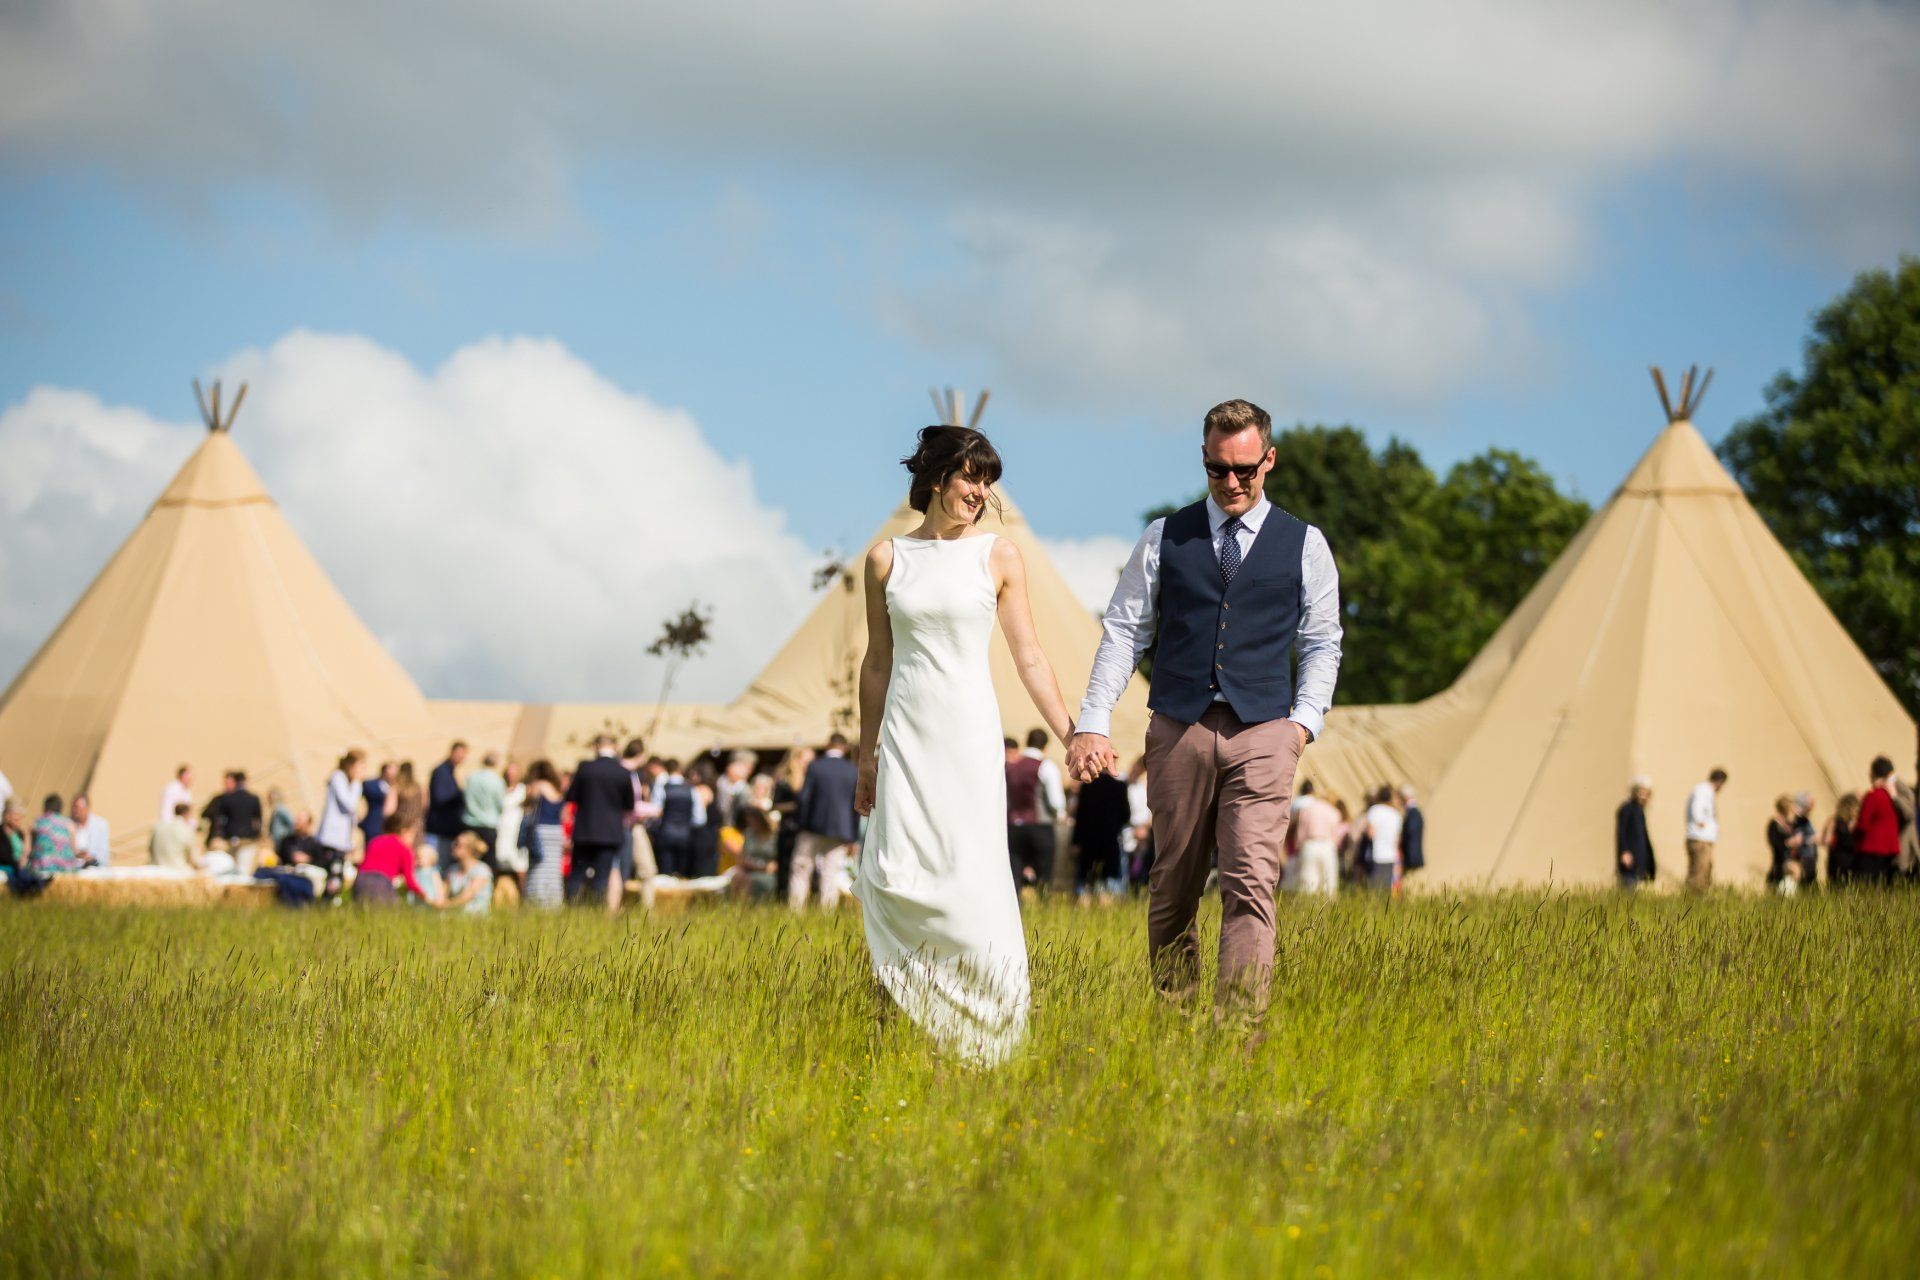 Bride and Groom at an outdoor tipi wedding